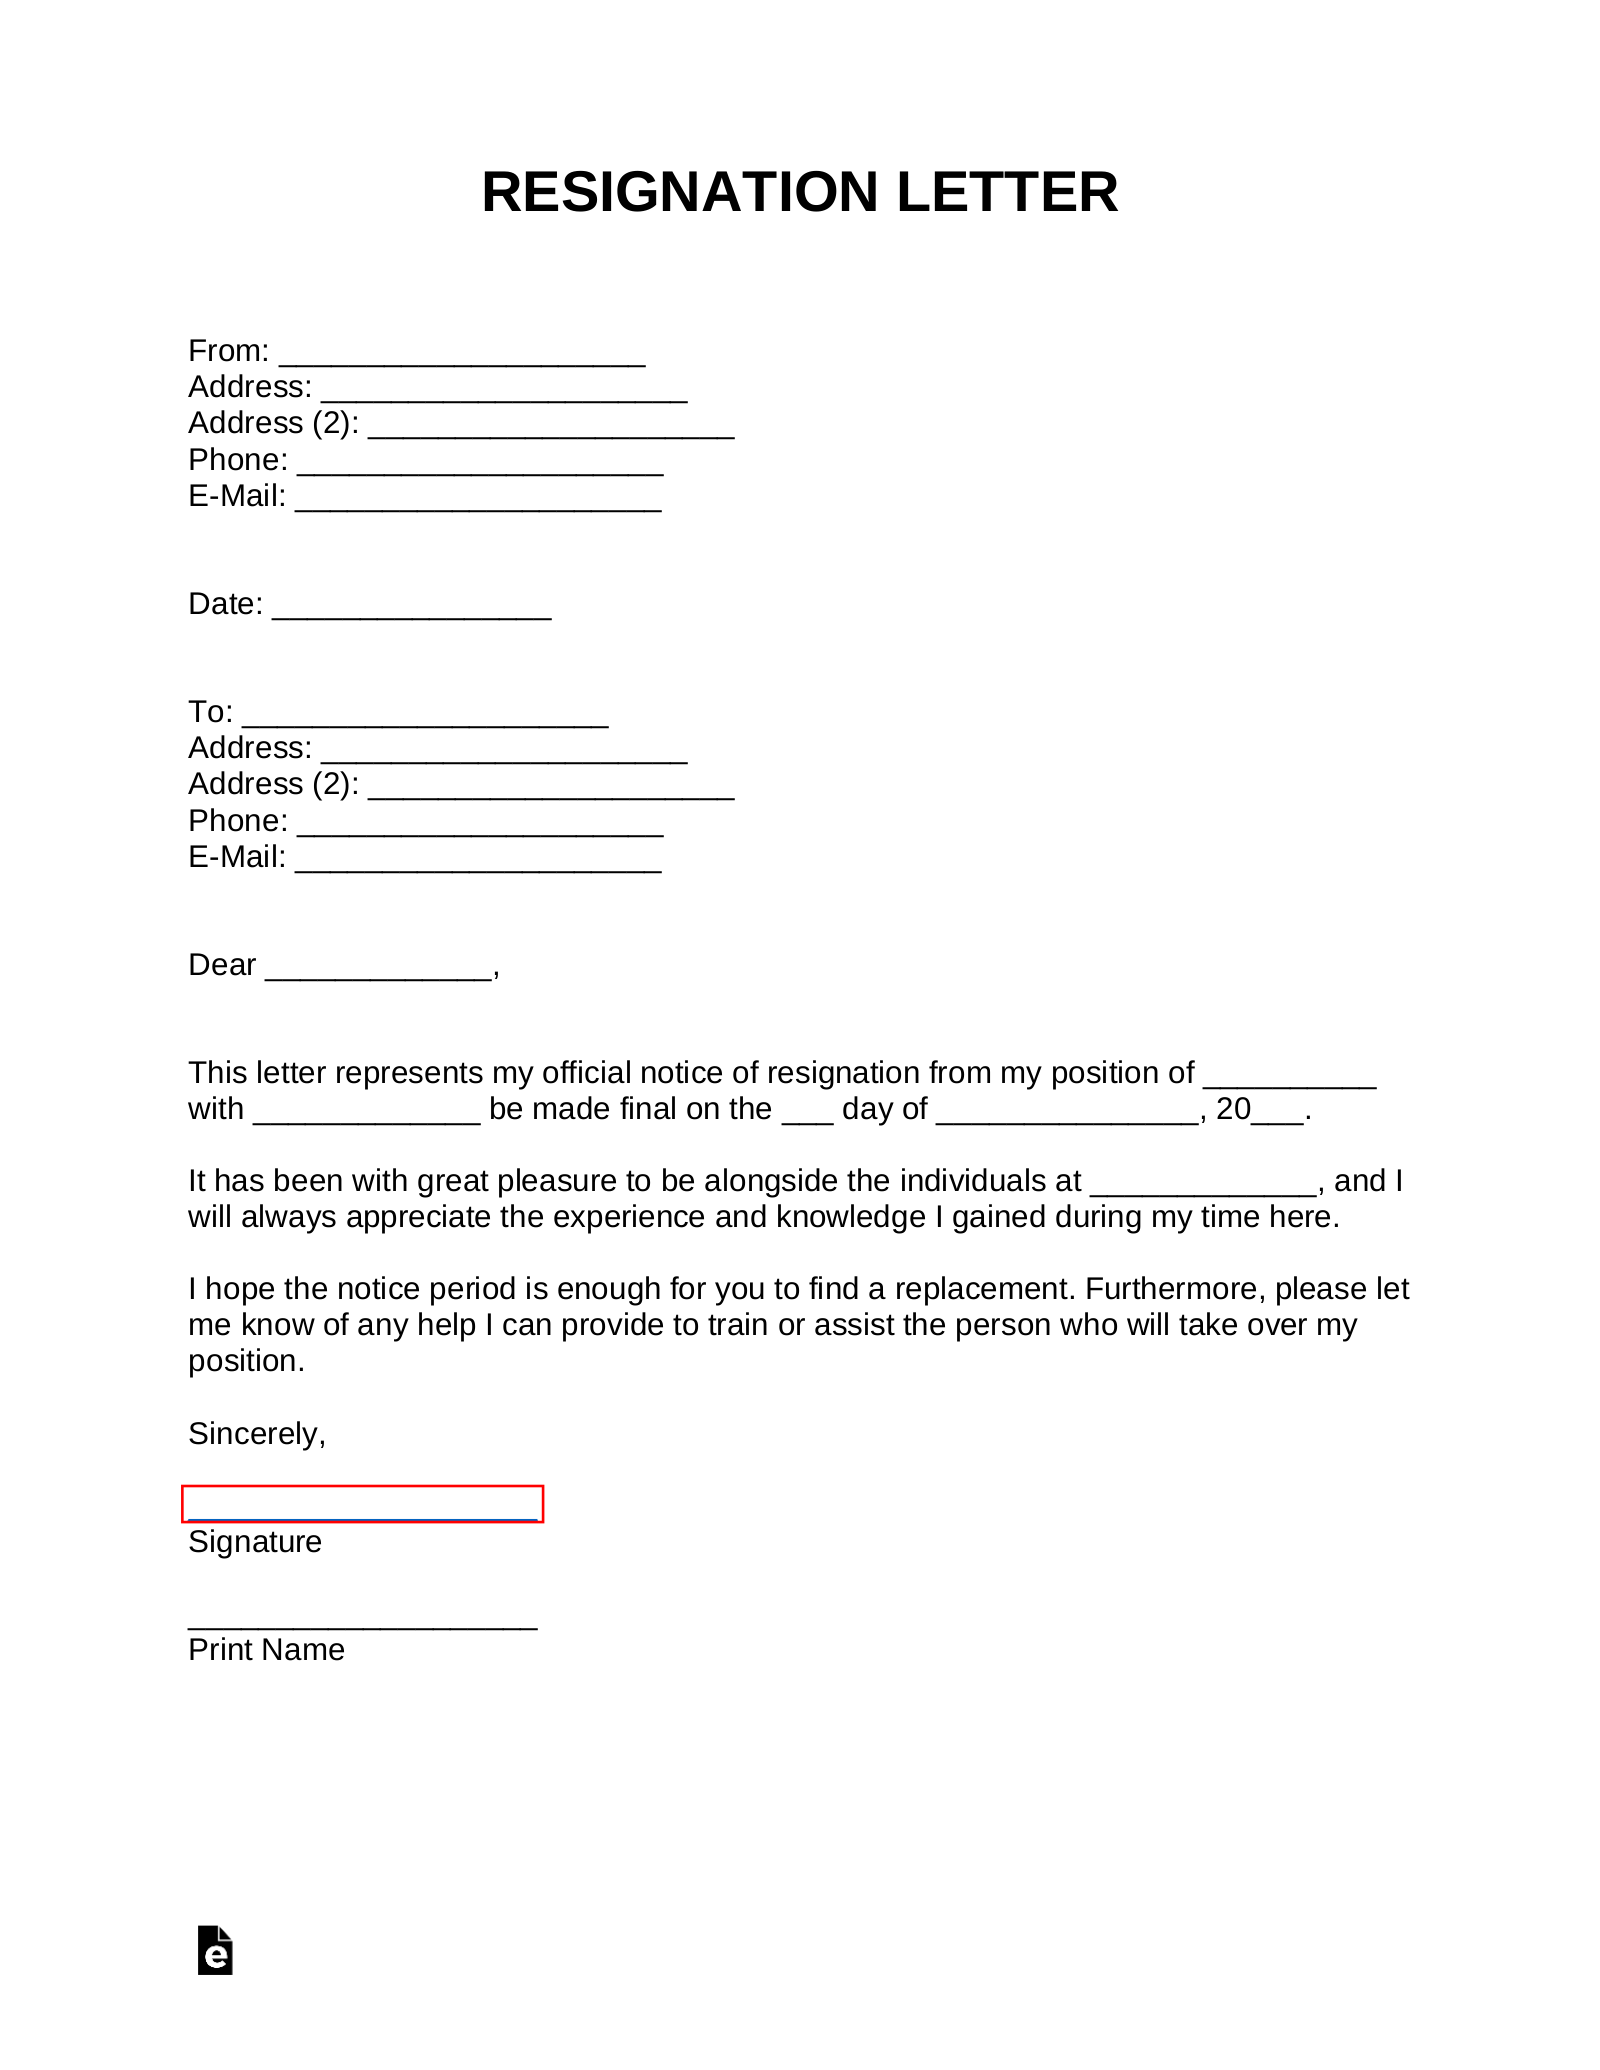 Resignation Letter Template Doc from eforms.com